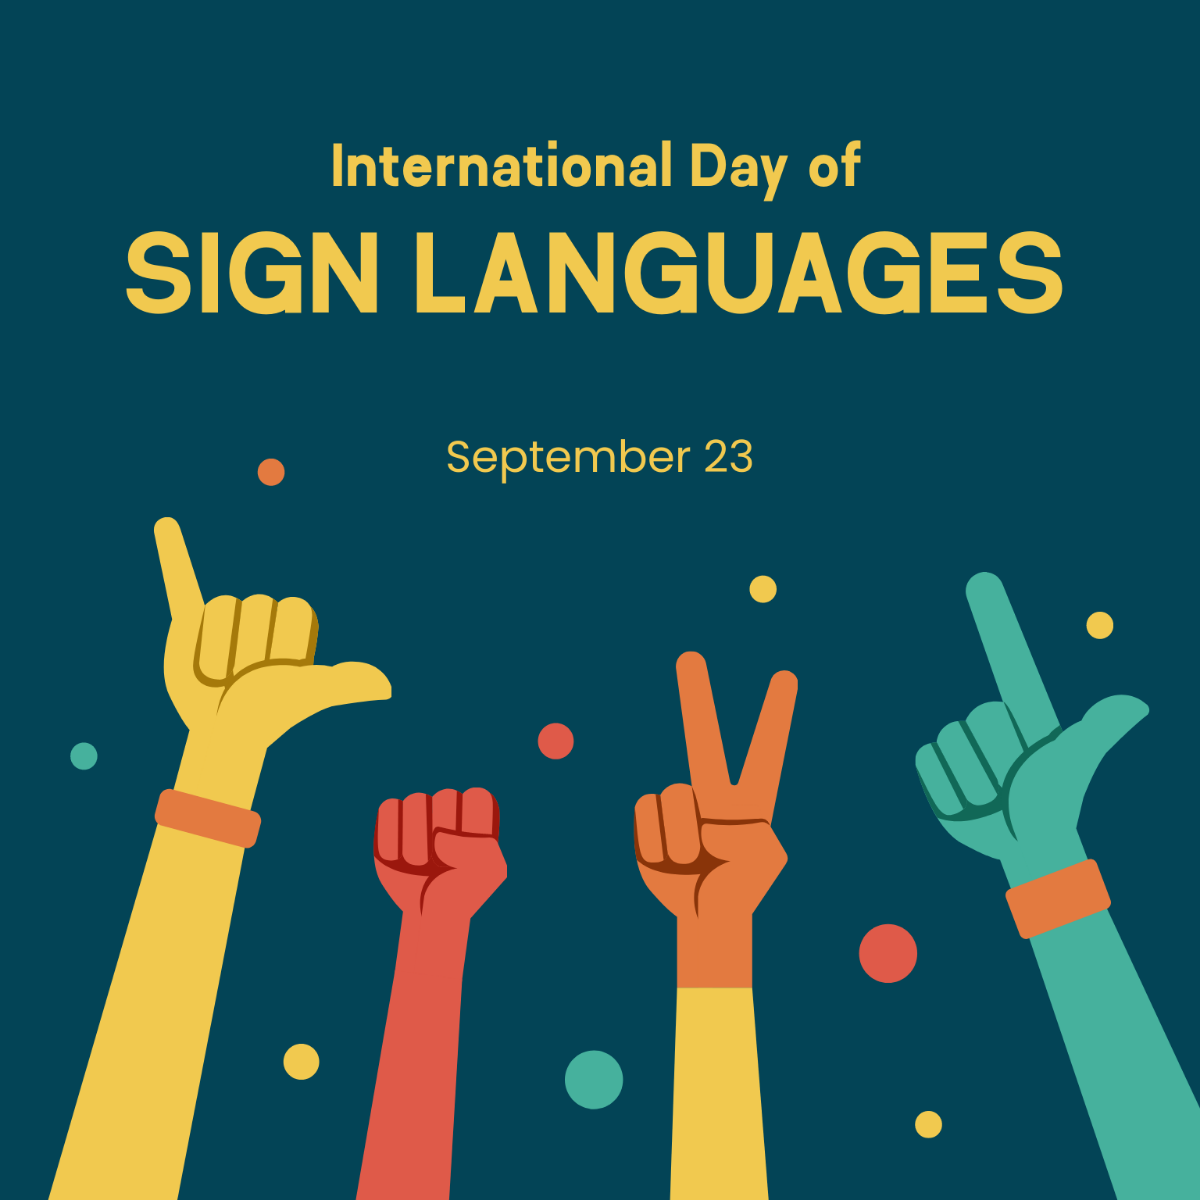 Free International Day of Sign Languages Flyer Vector Template